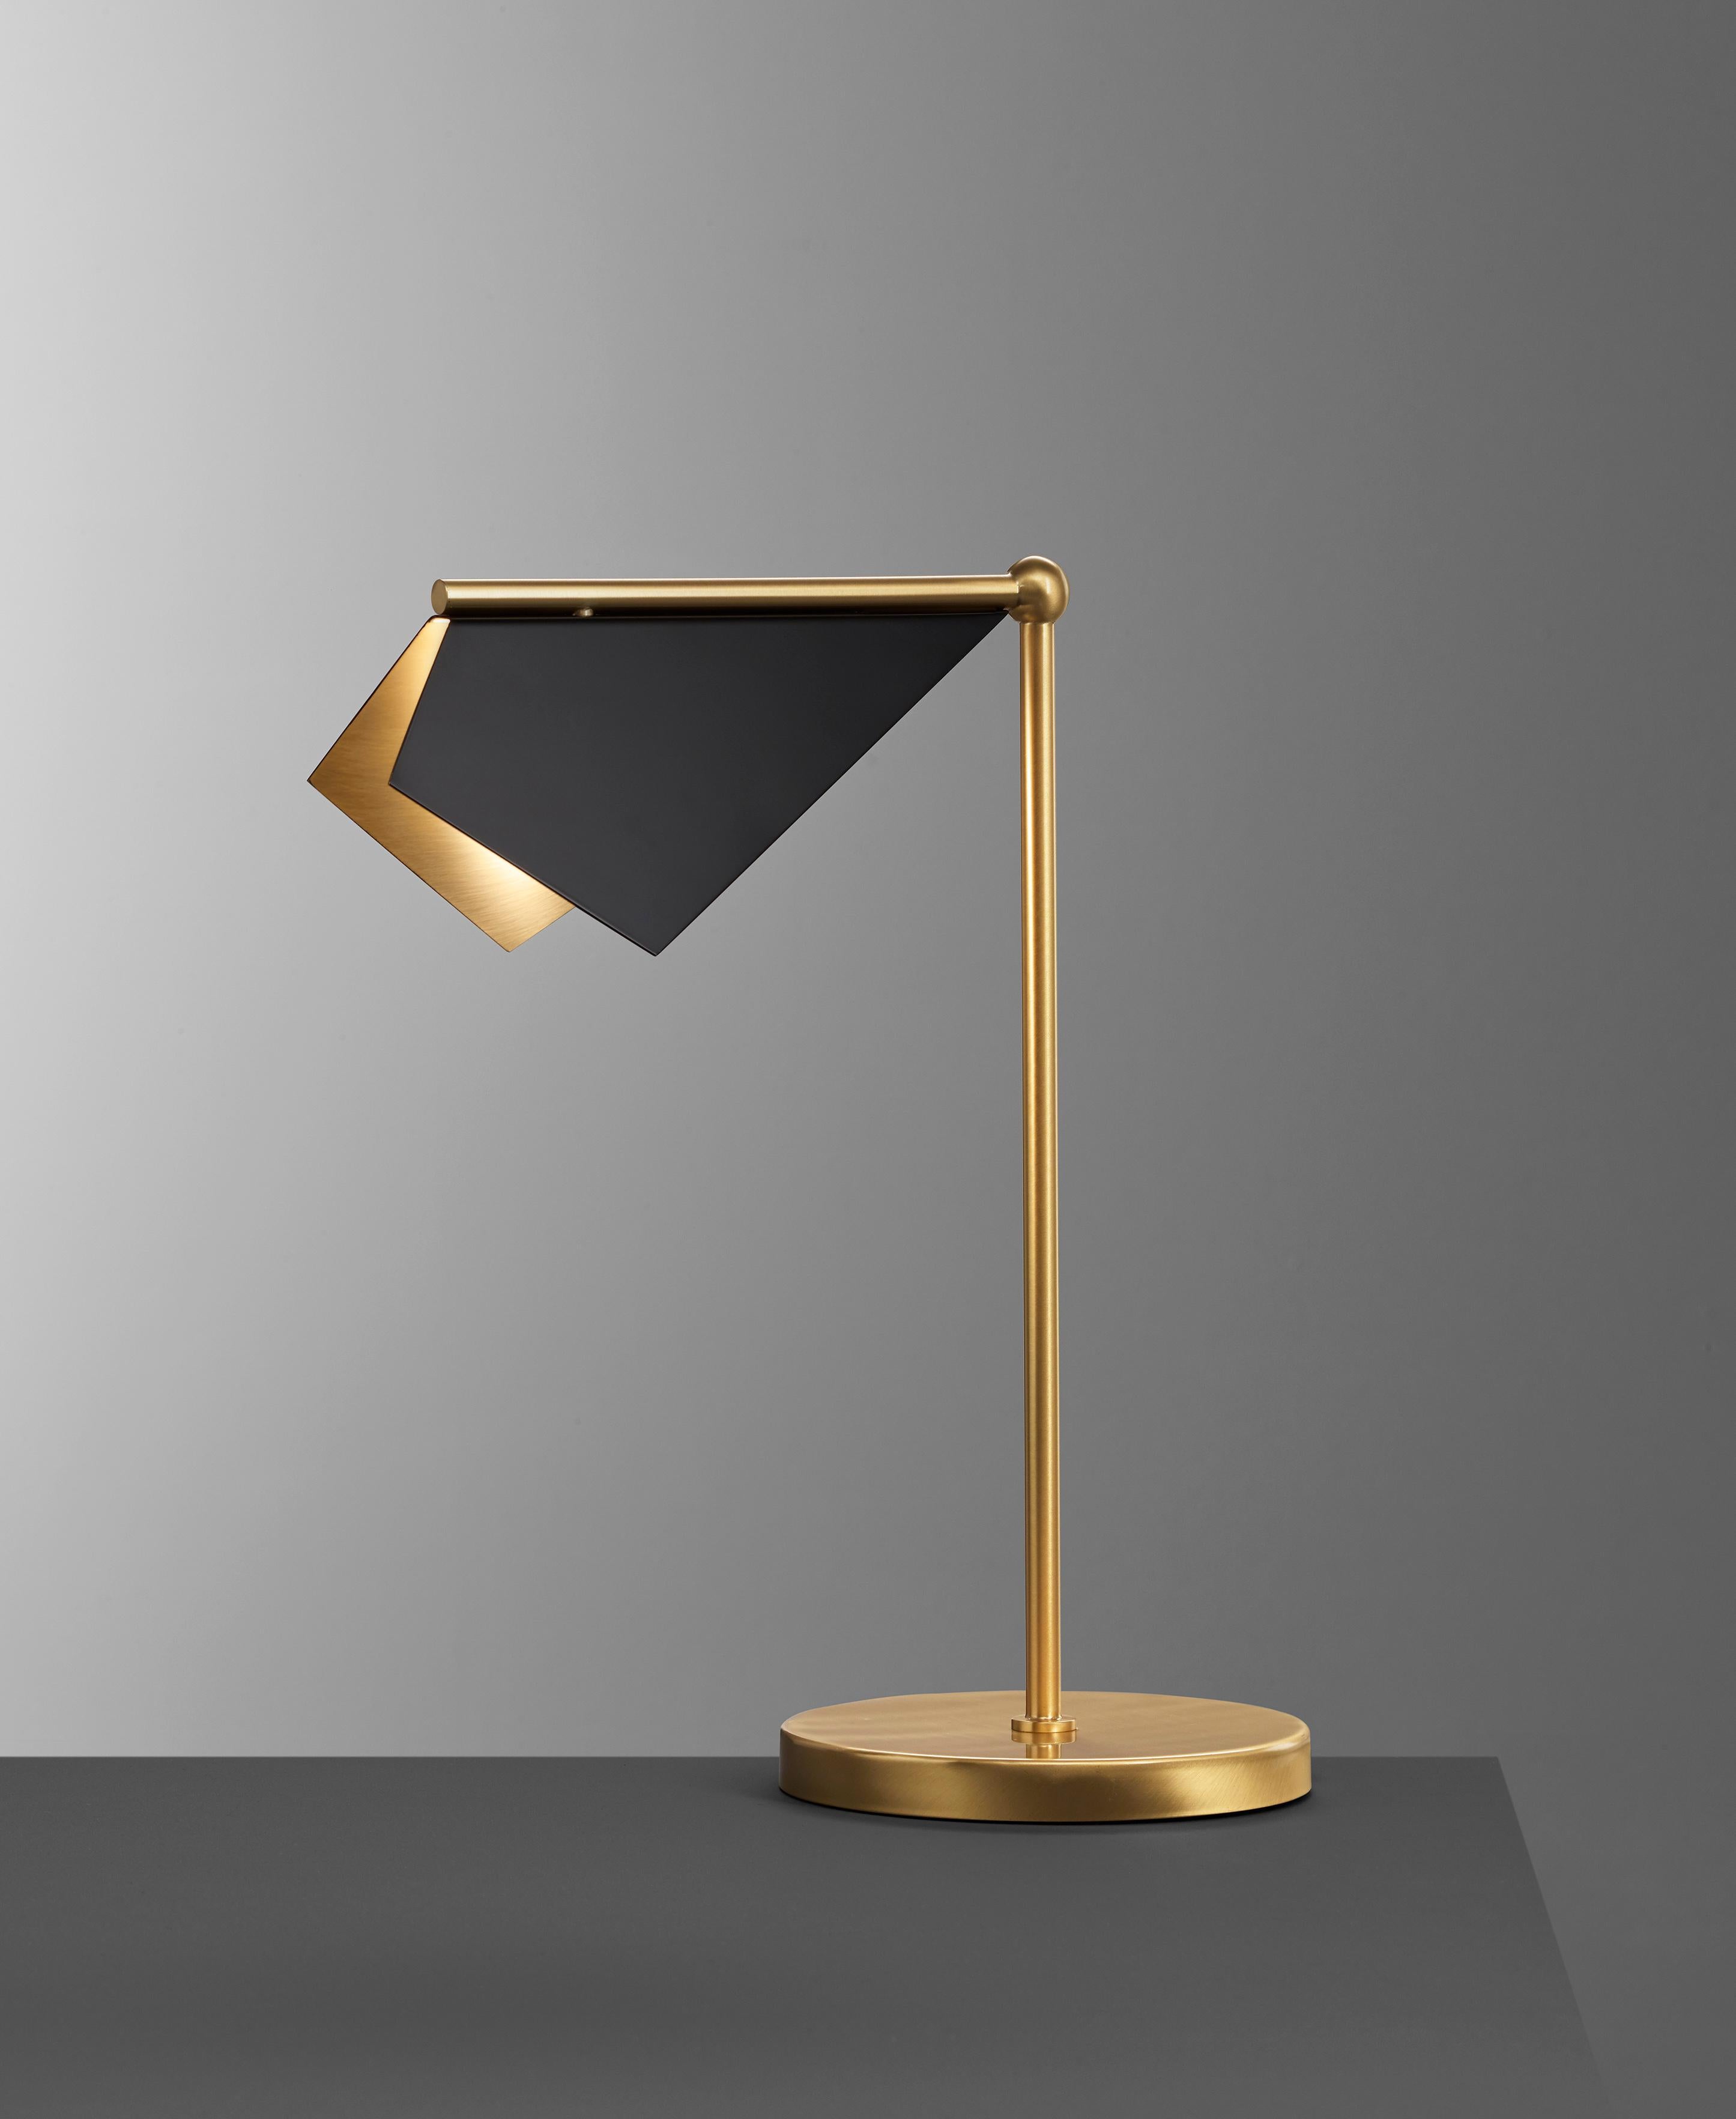 Design and crafted by world-renowned lighting brand IMAGIN, and inspired from observing bats while on vacation, this table lamp combines a simple folded brass shade along with a long arm brass base. The topside of the shade finished in matt black